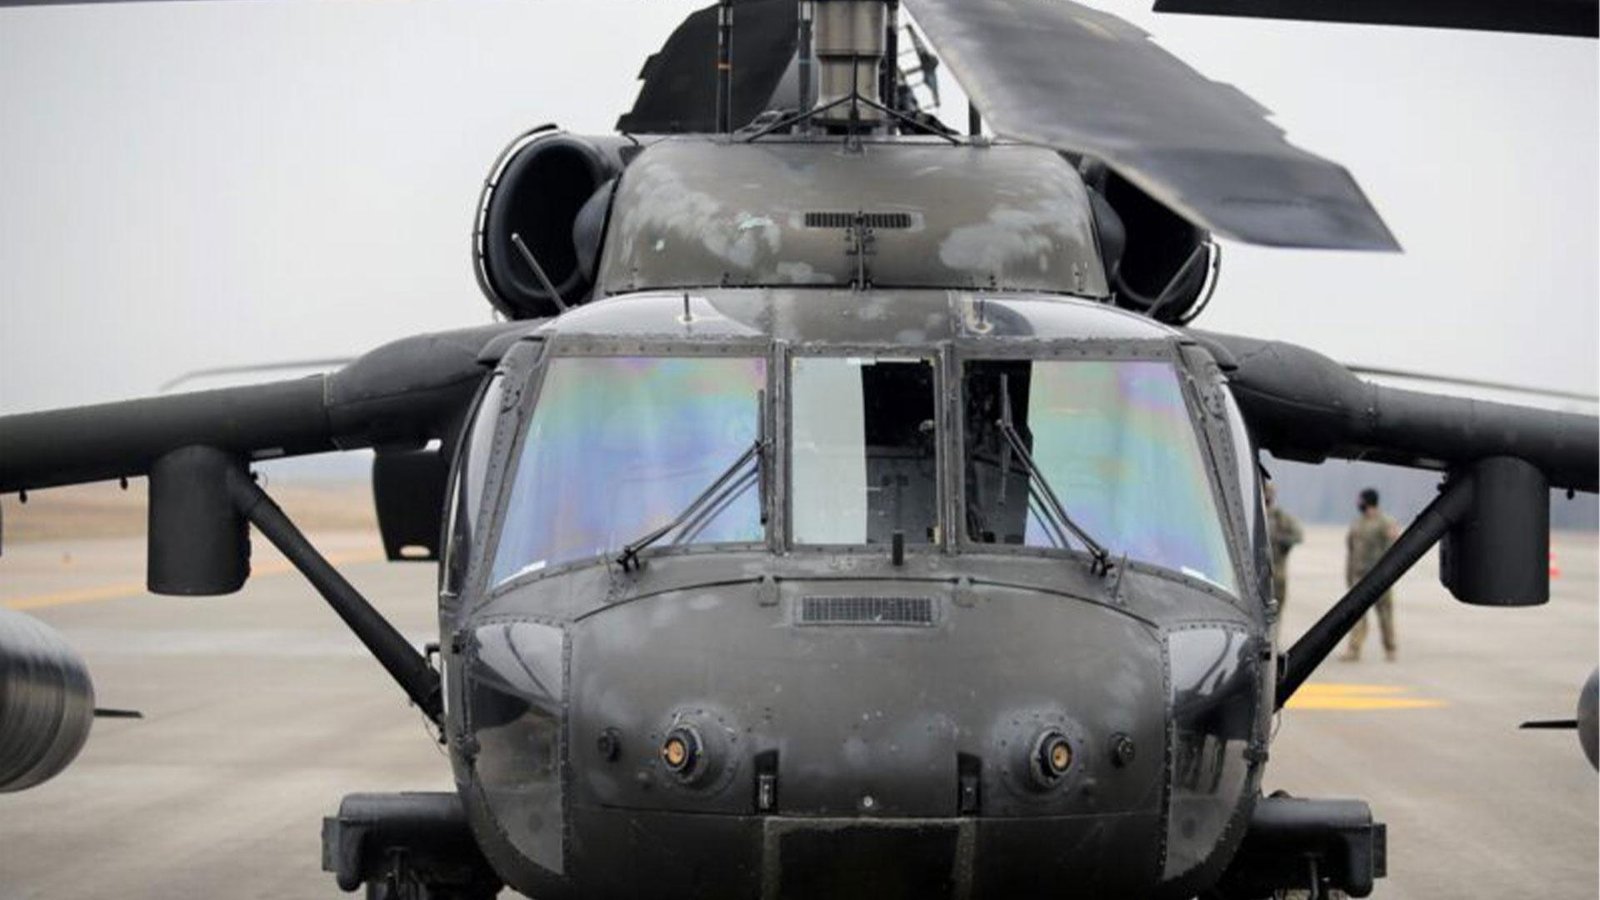 Greece's 35 Black hawk helicopters acquisition